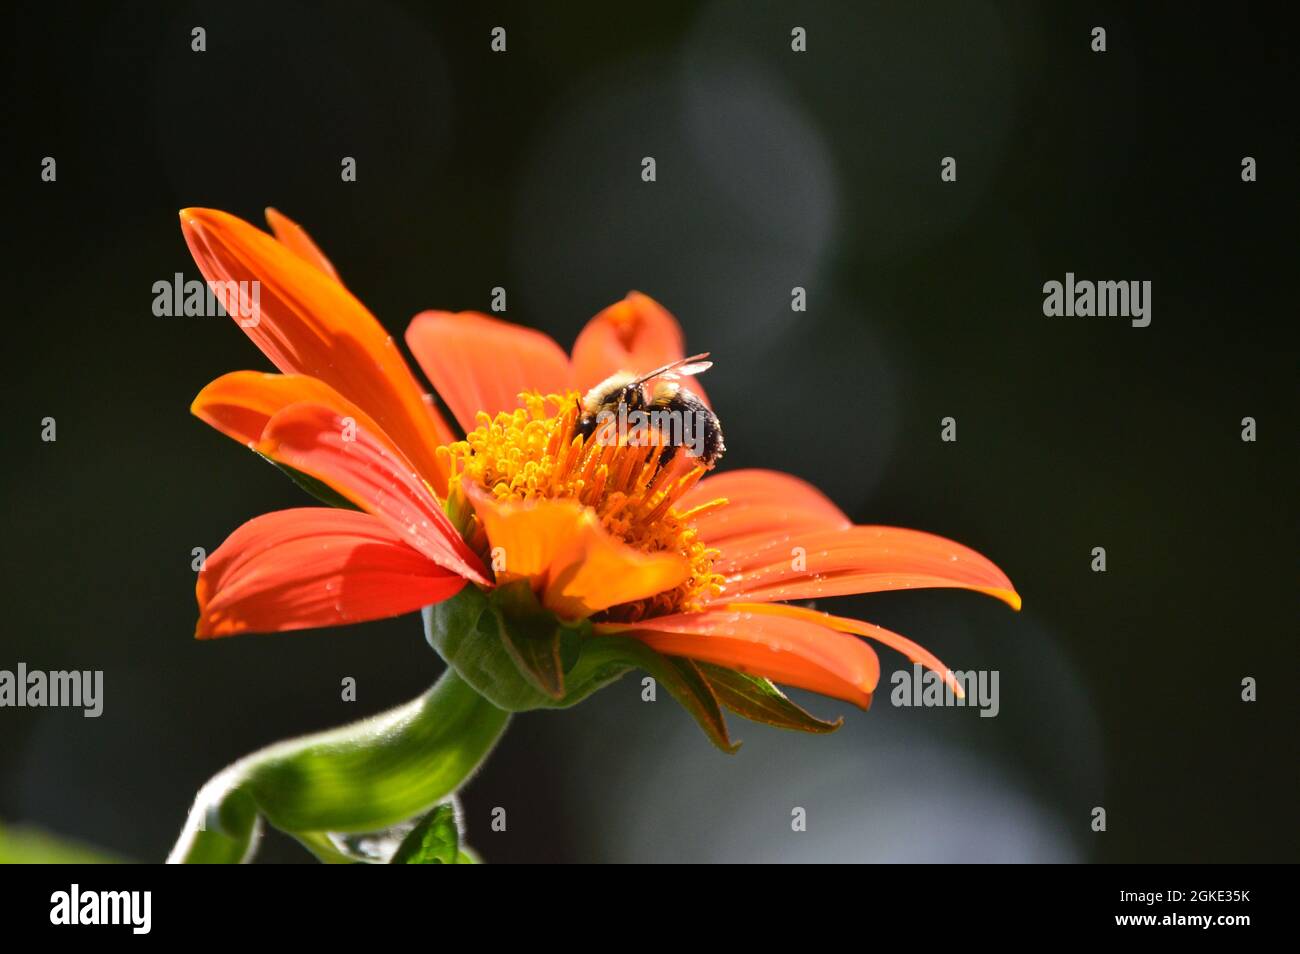 Macro up close bumble bee pollinating Mexican sunflower, Tithonia Rotundifolia, torch variety. Background blurred Stock Photo